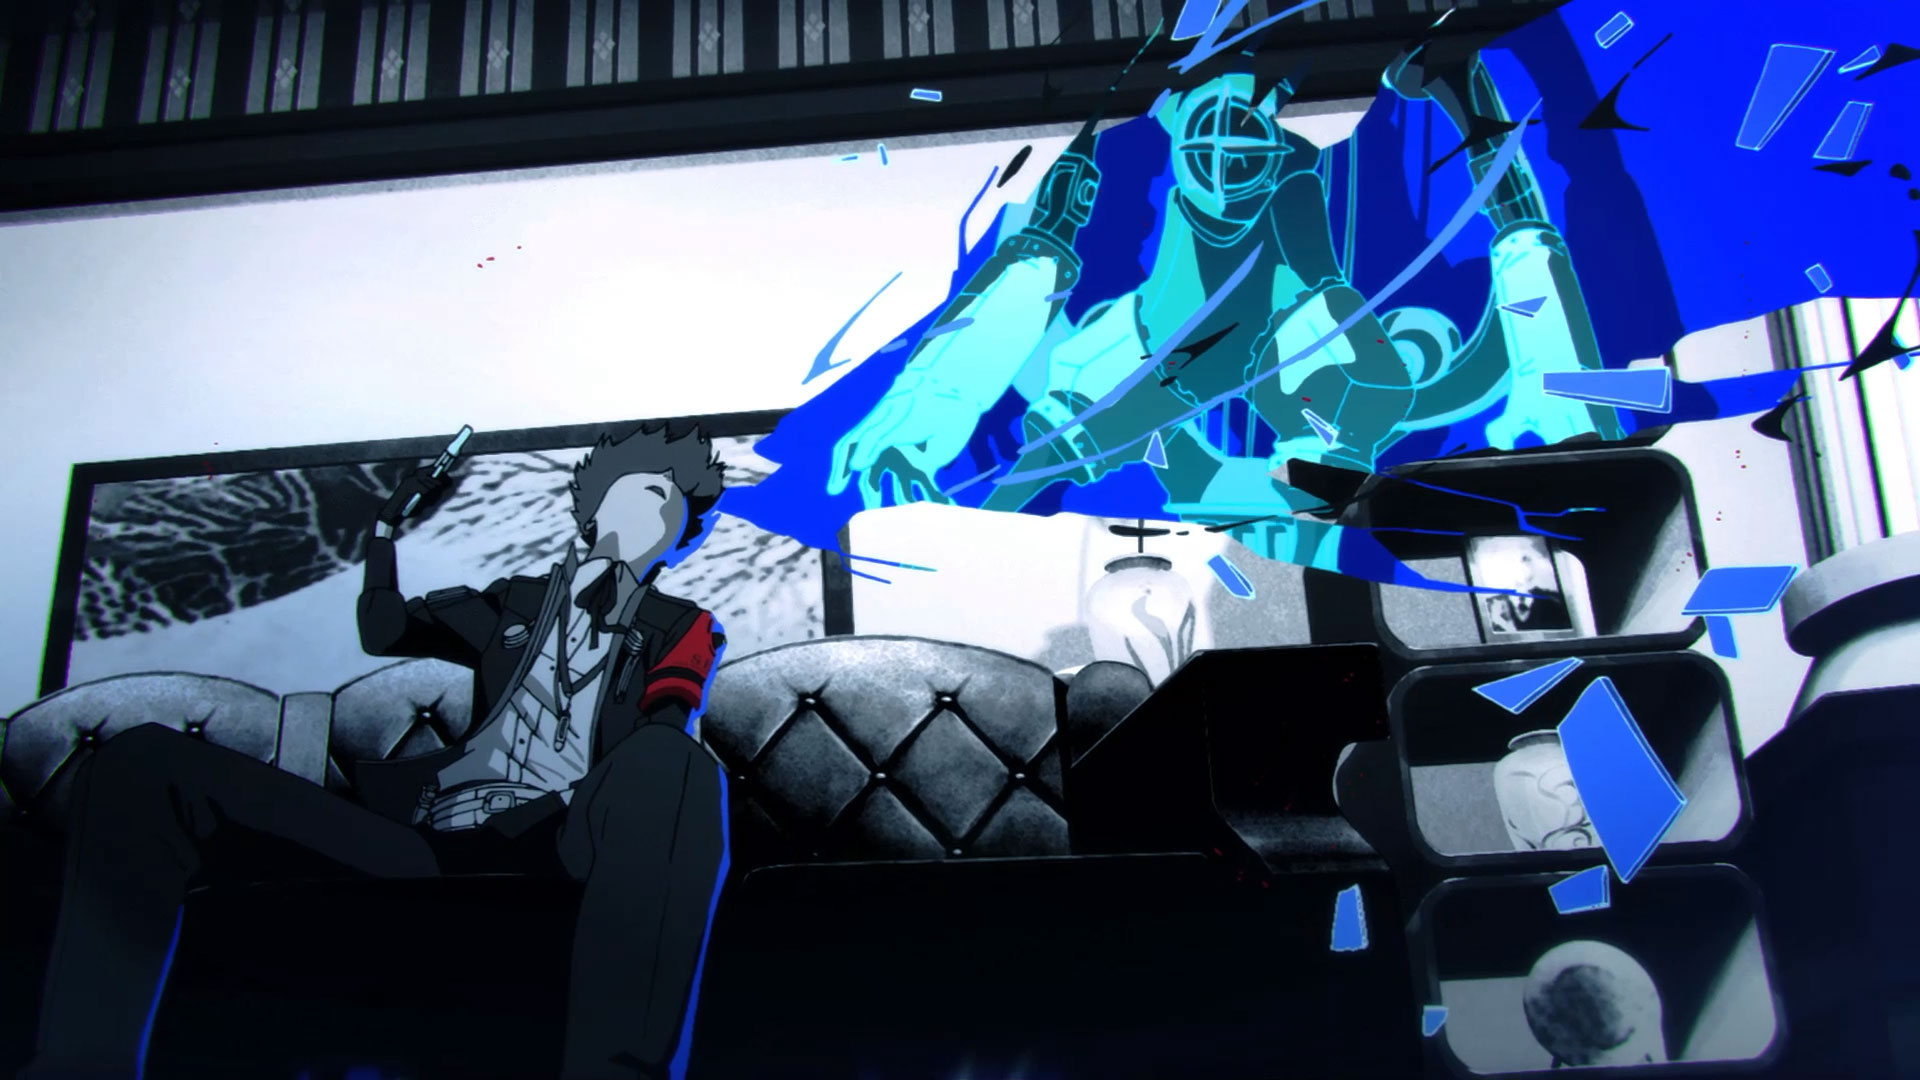 Persona 3 Reload Official Website